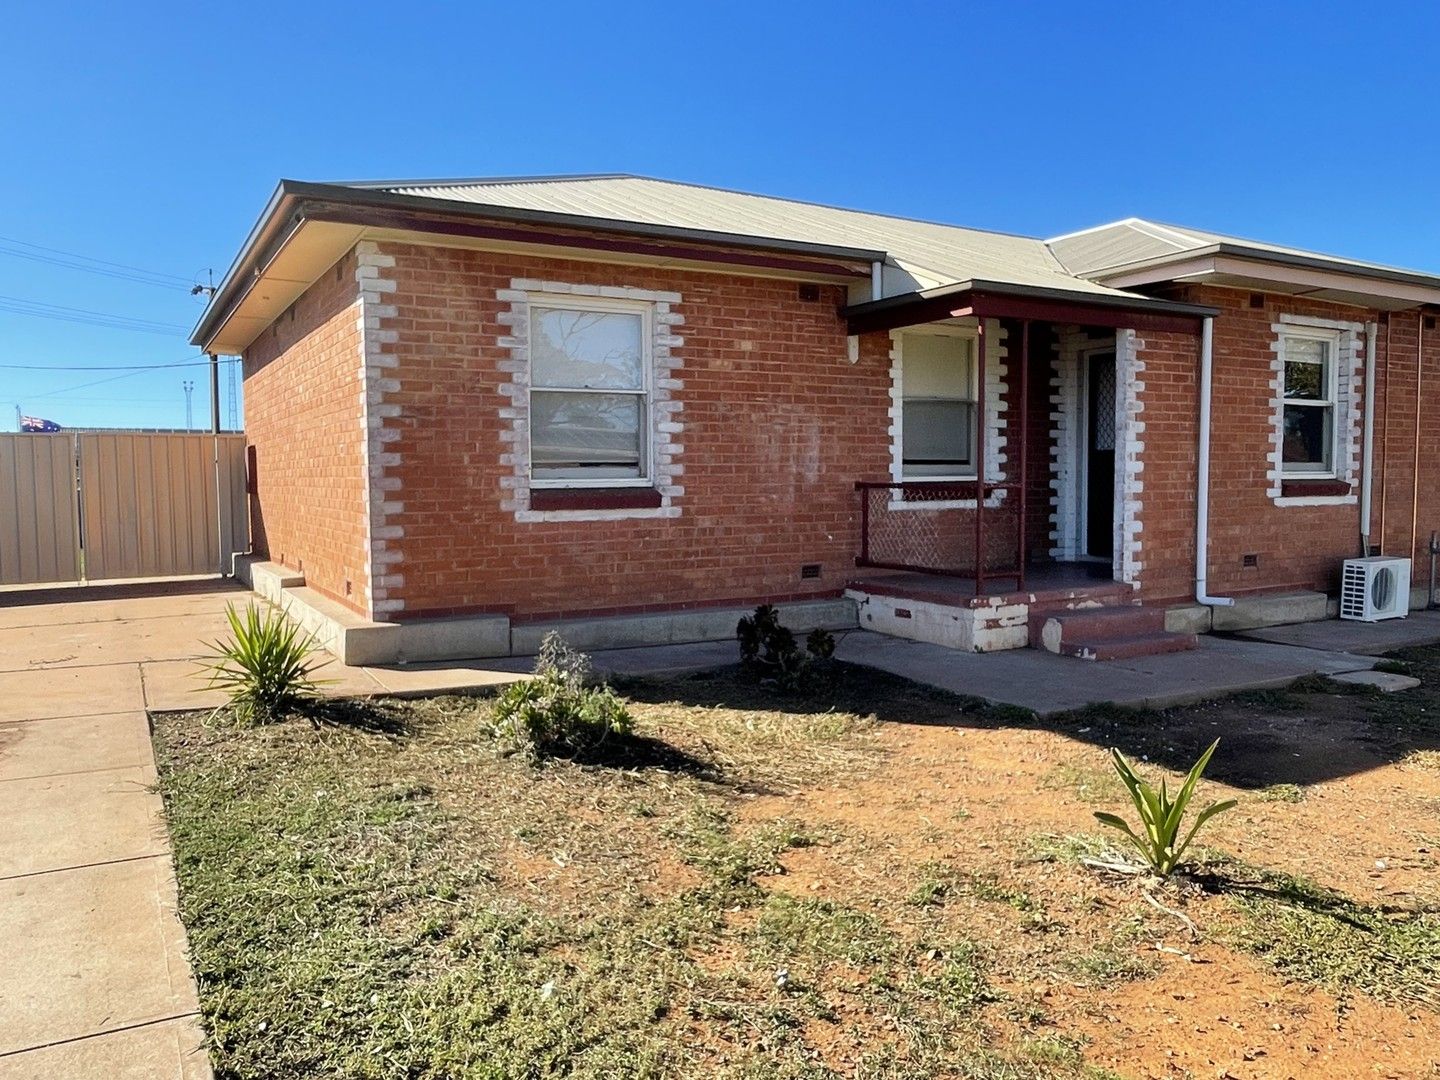 3 bedrooms Semi-Detached in 2 Brook Street WHYALLA STUART SA, 5608